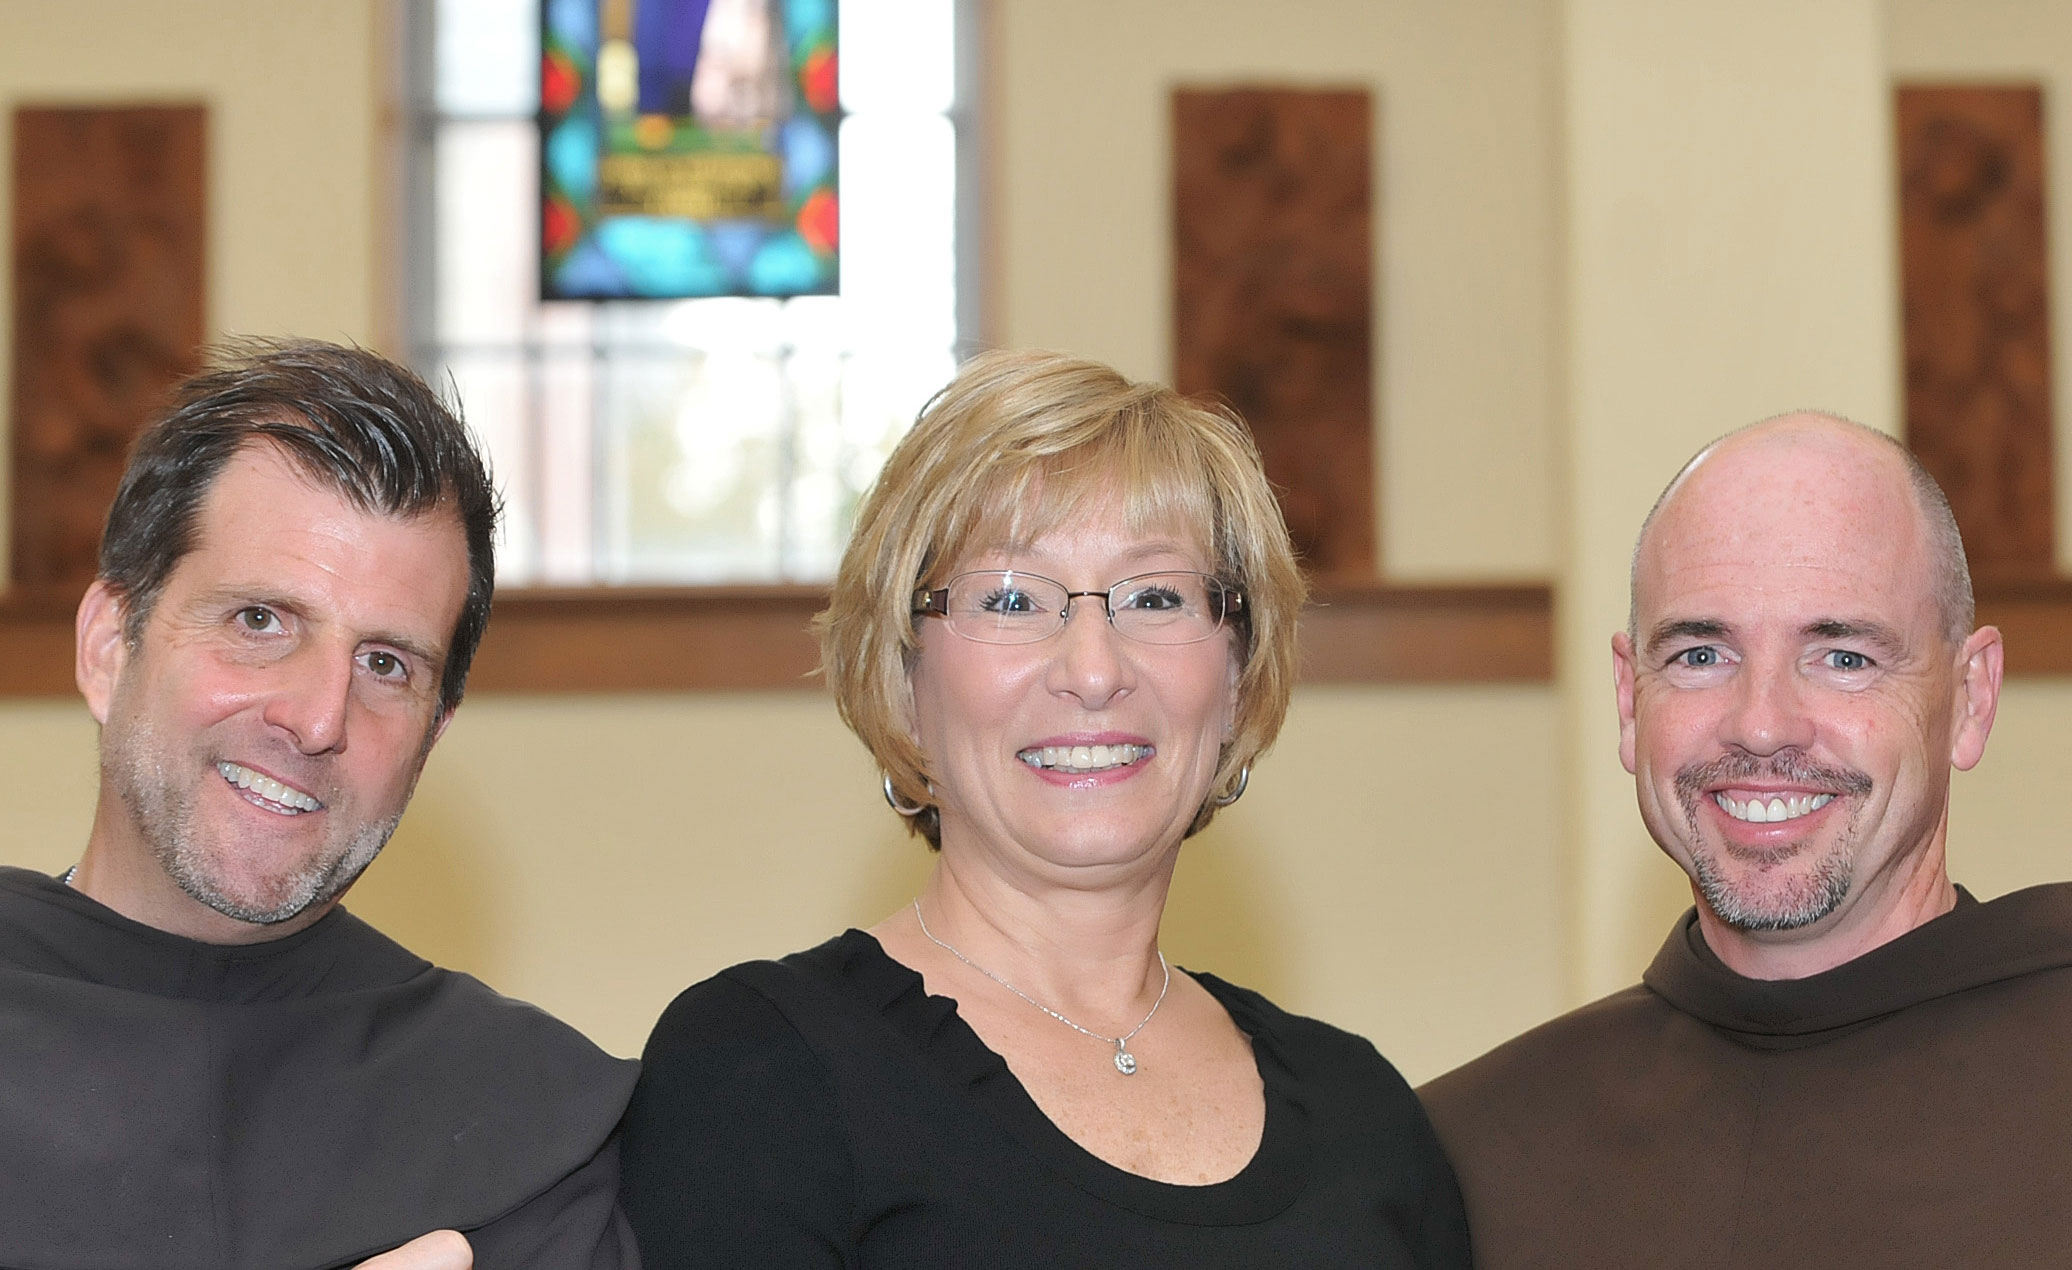 Left to Right: Mentoring Program Coordinator Fr. Sean O'Brien, O.F.M., Franciscan Center Director Judy Dougherty '06, College Chaplain Fr. Larry Anderson, O.F.M.